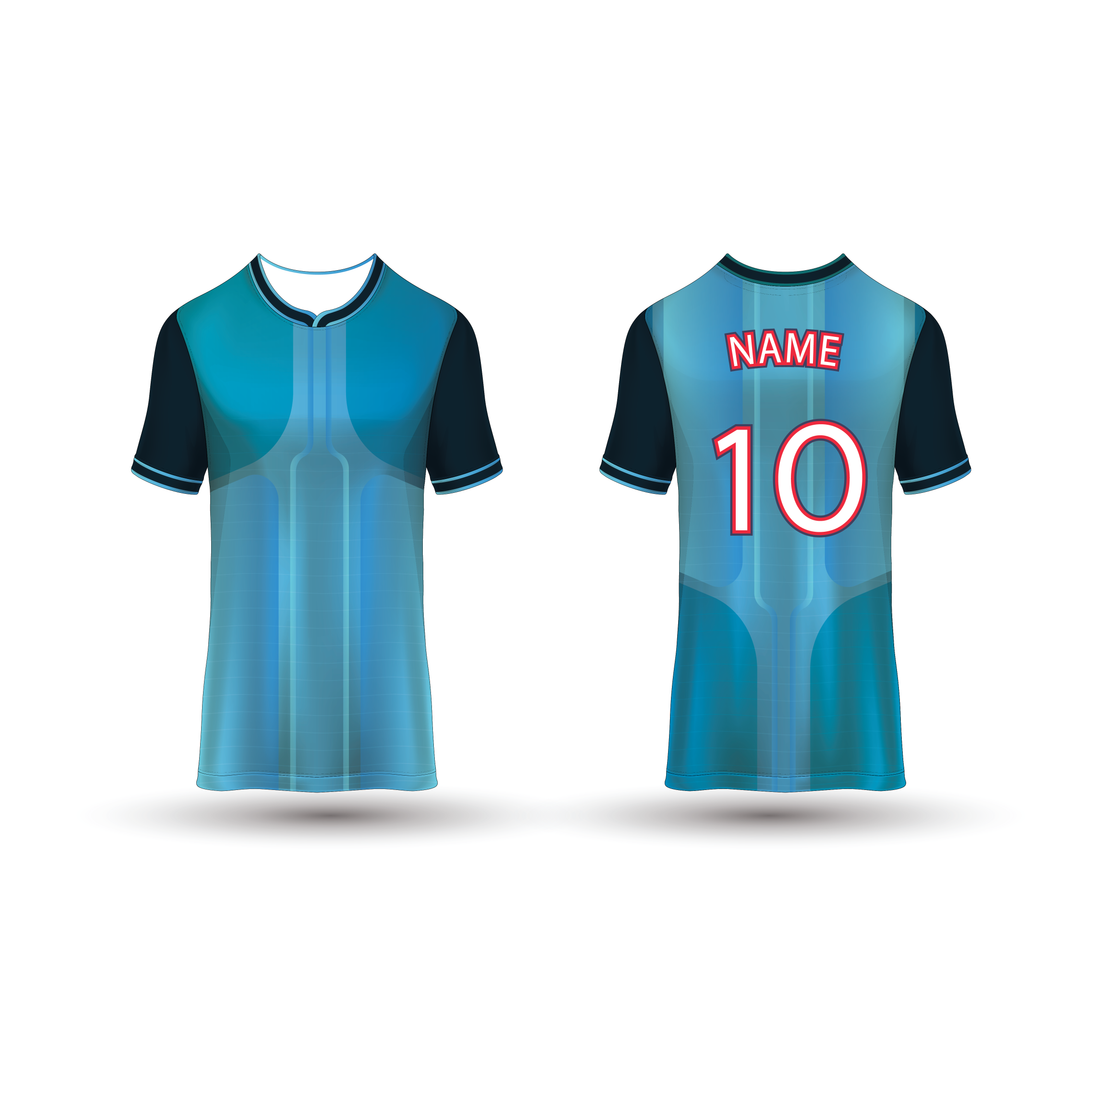 NEXT PRINT All Over Printed Customized Sublimation T-Shirt Unisex Sports Jersey Player Name & Number, Team Name NP50000229